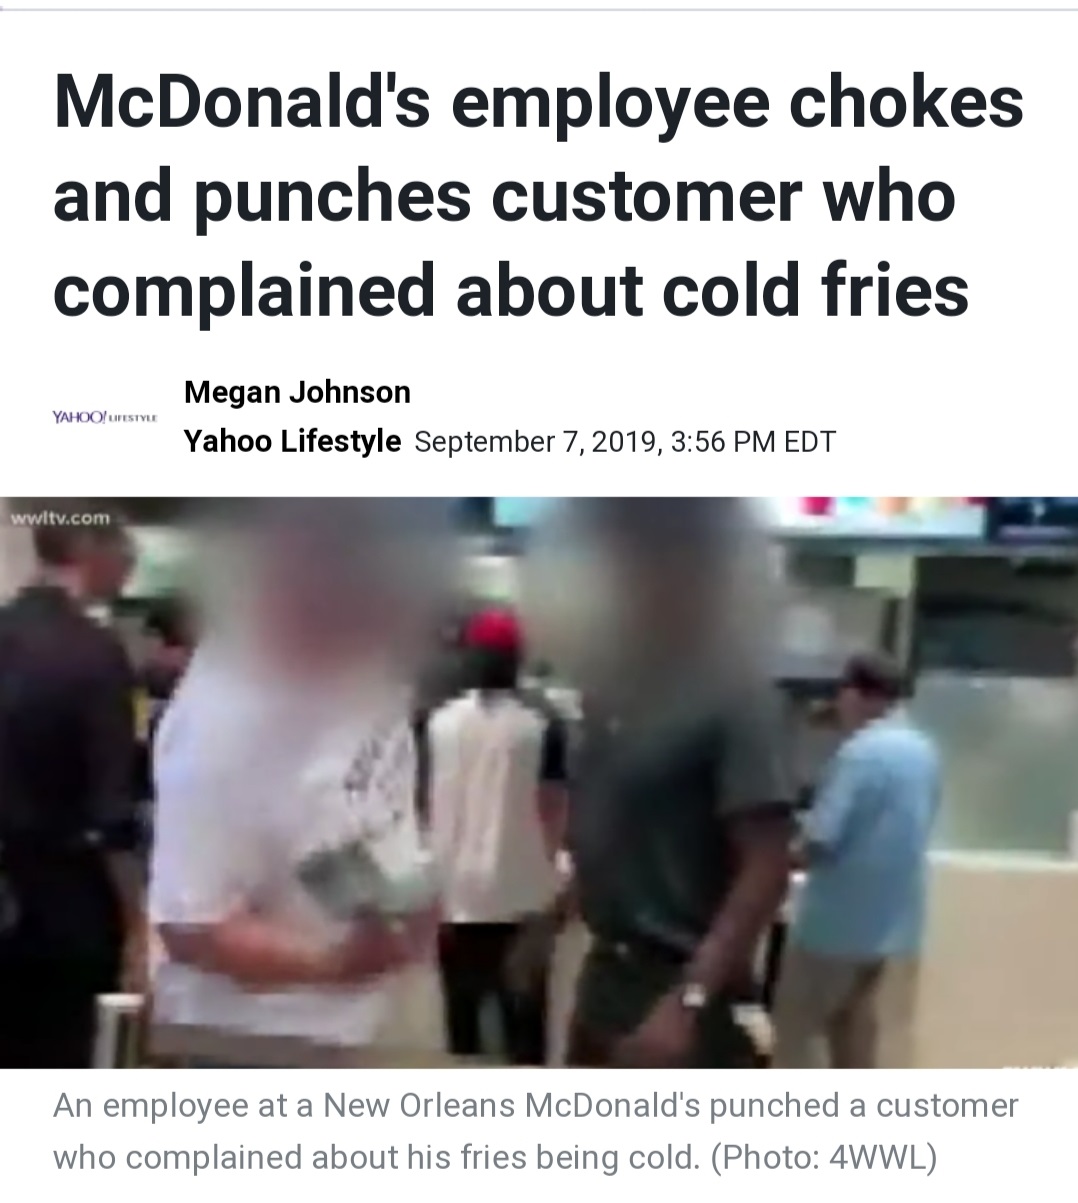 k9 friends - McDonald's employee chokes and punches customer who complained about cold fries Yahoo! Lifestyle Megan Johnson Yahoo Lifestyle , Edt wwitv.com An employee at a New Orleans McDonald's punched a customer who complained about his fries being col